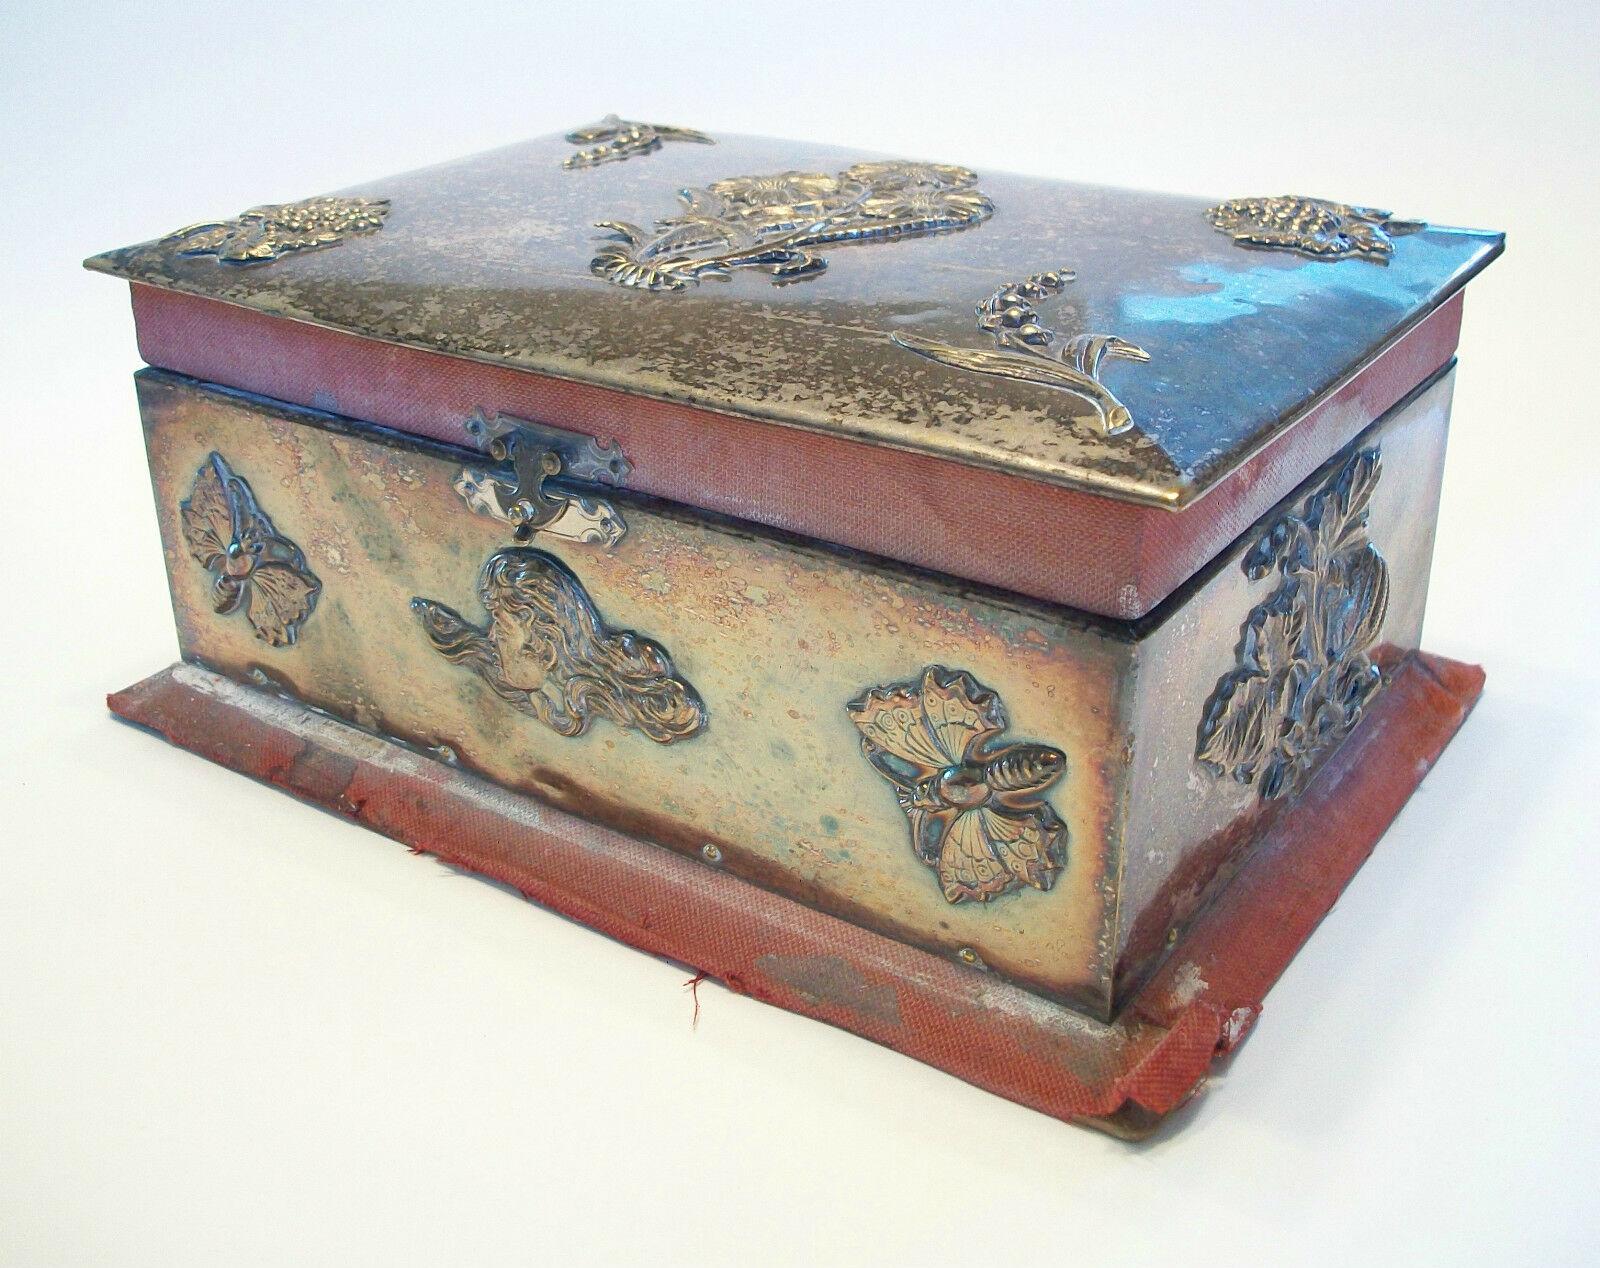 Arts and Crafts Arts & Crafts Jewelry Box with Applied Decoration - Unsigned - U K - Circa 1880 For Sale